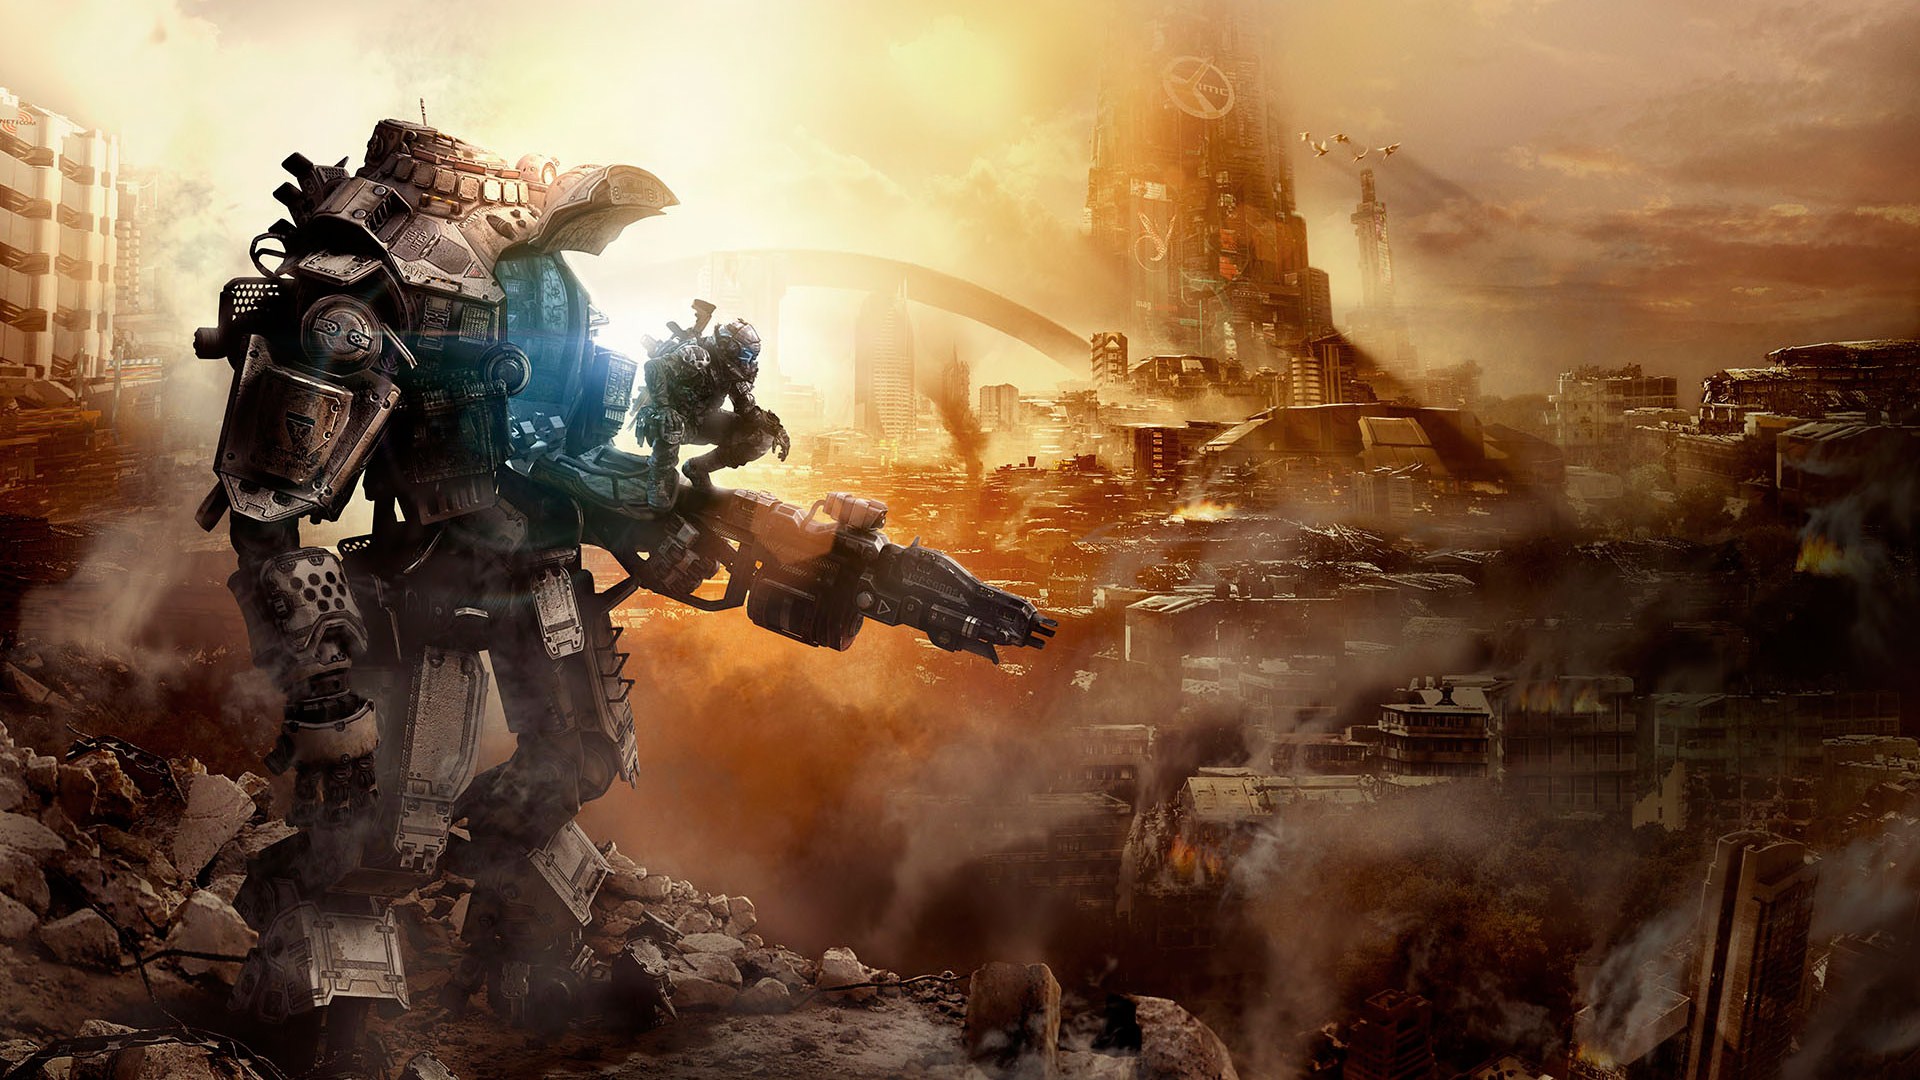 titanfall 2 wallpaper hd,action adventure game,pc game,strategy video game,cg artwork,battle